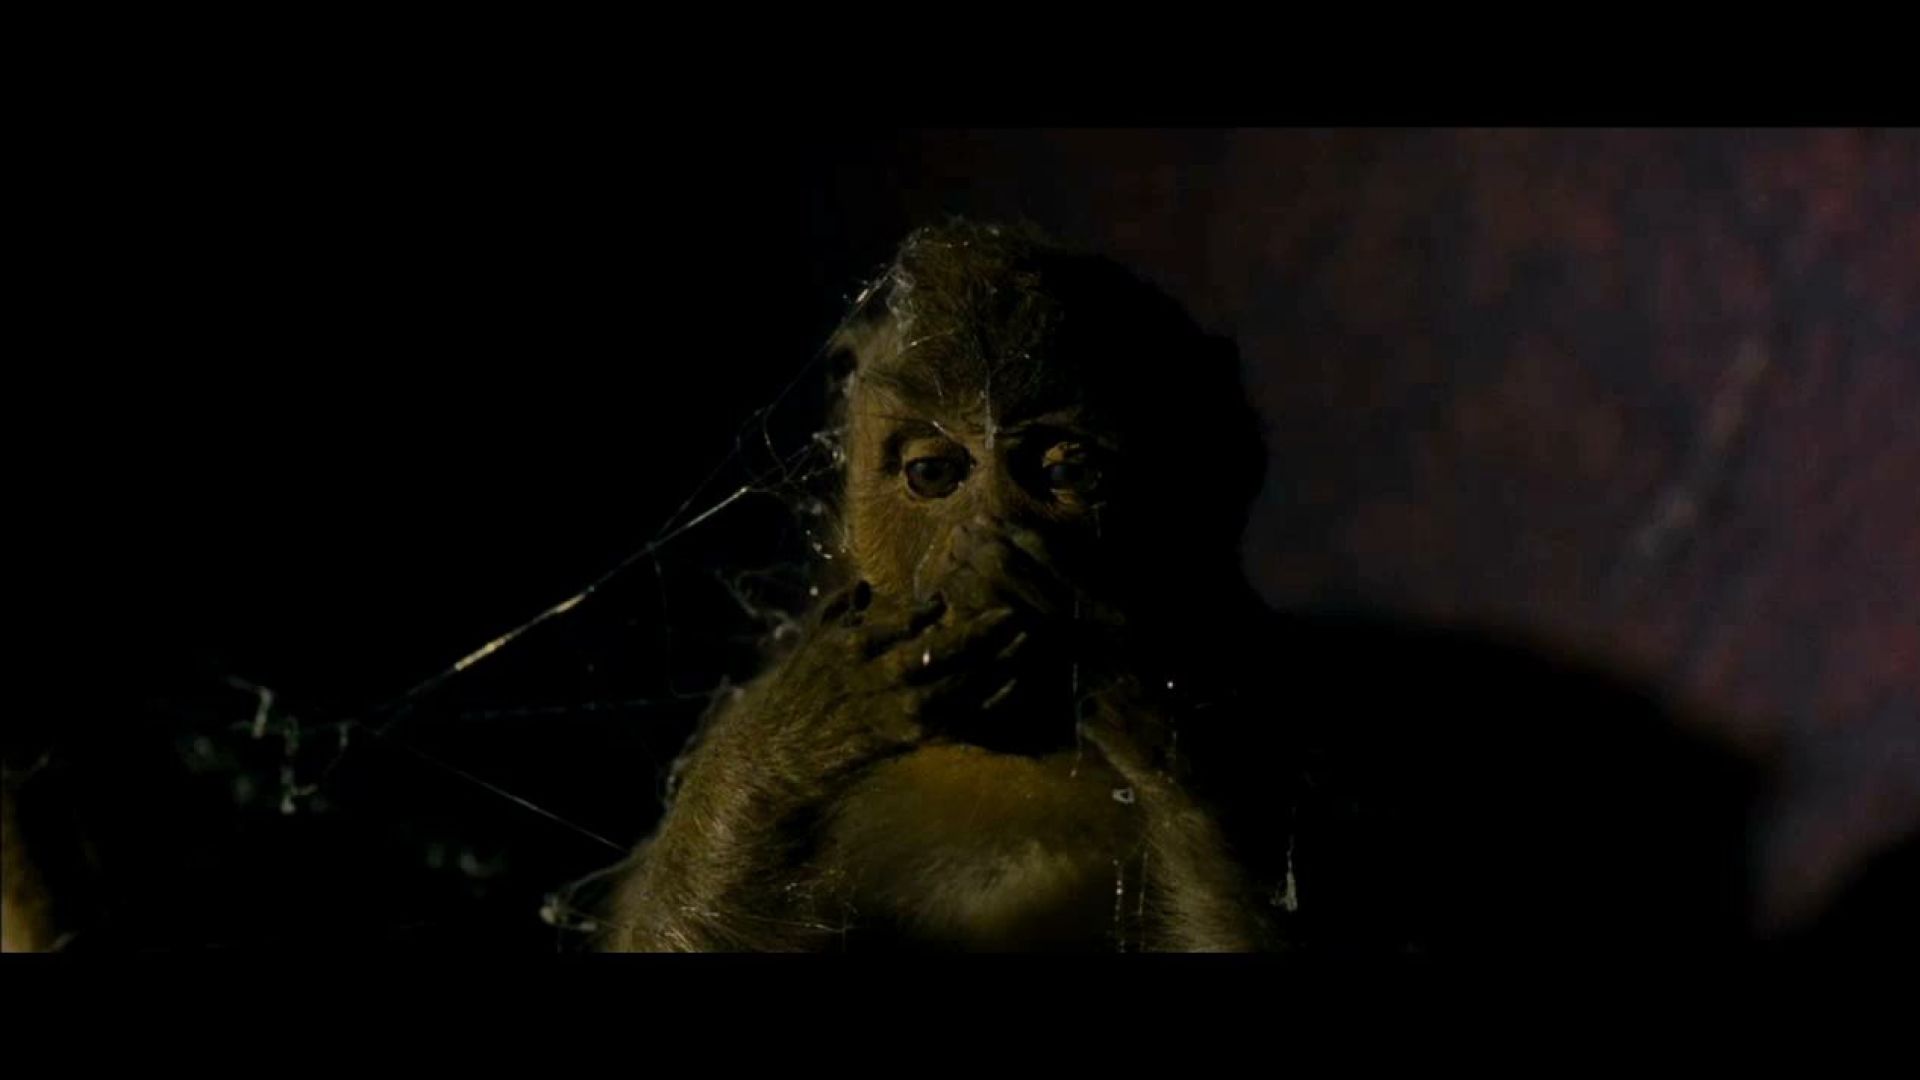 The Monkey is scared in The Woman in Black